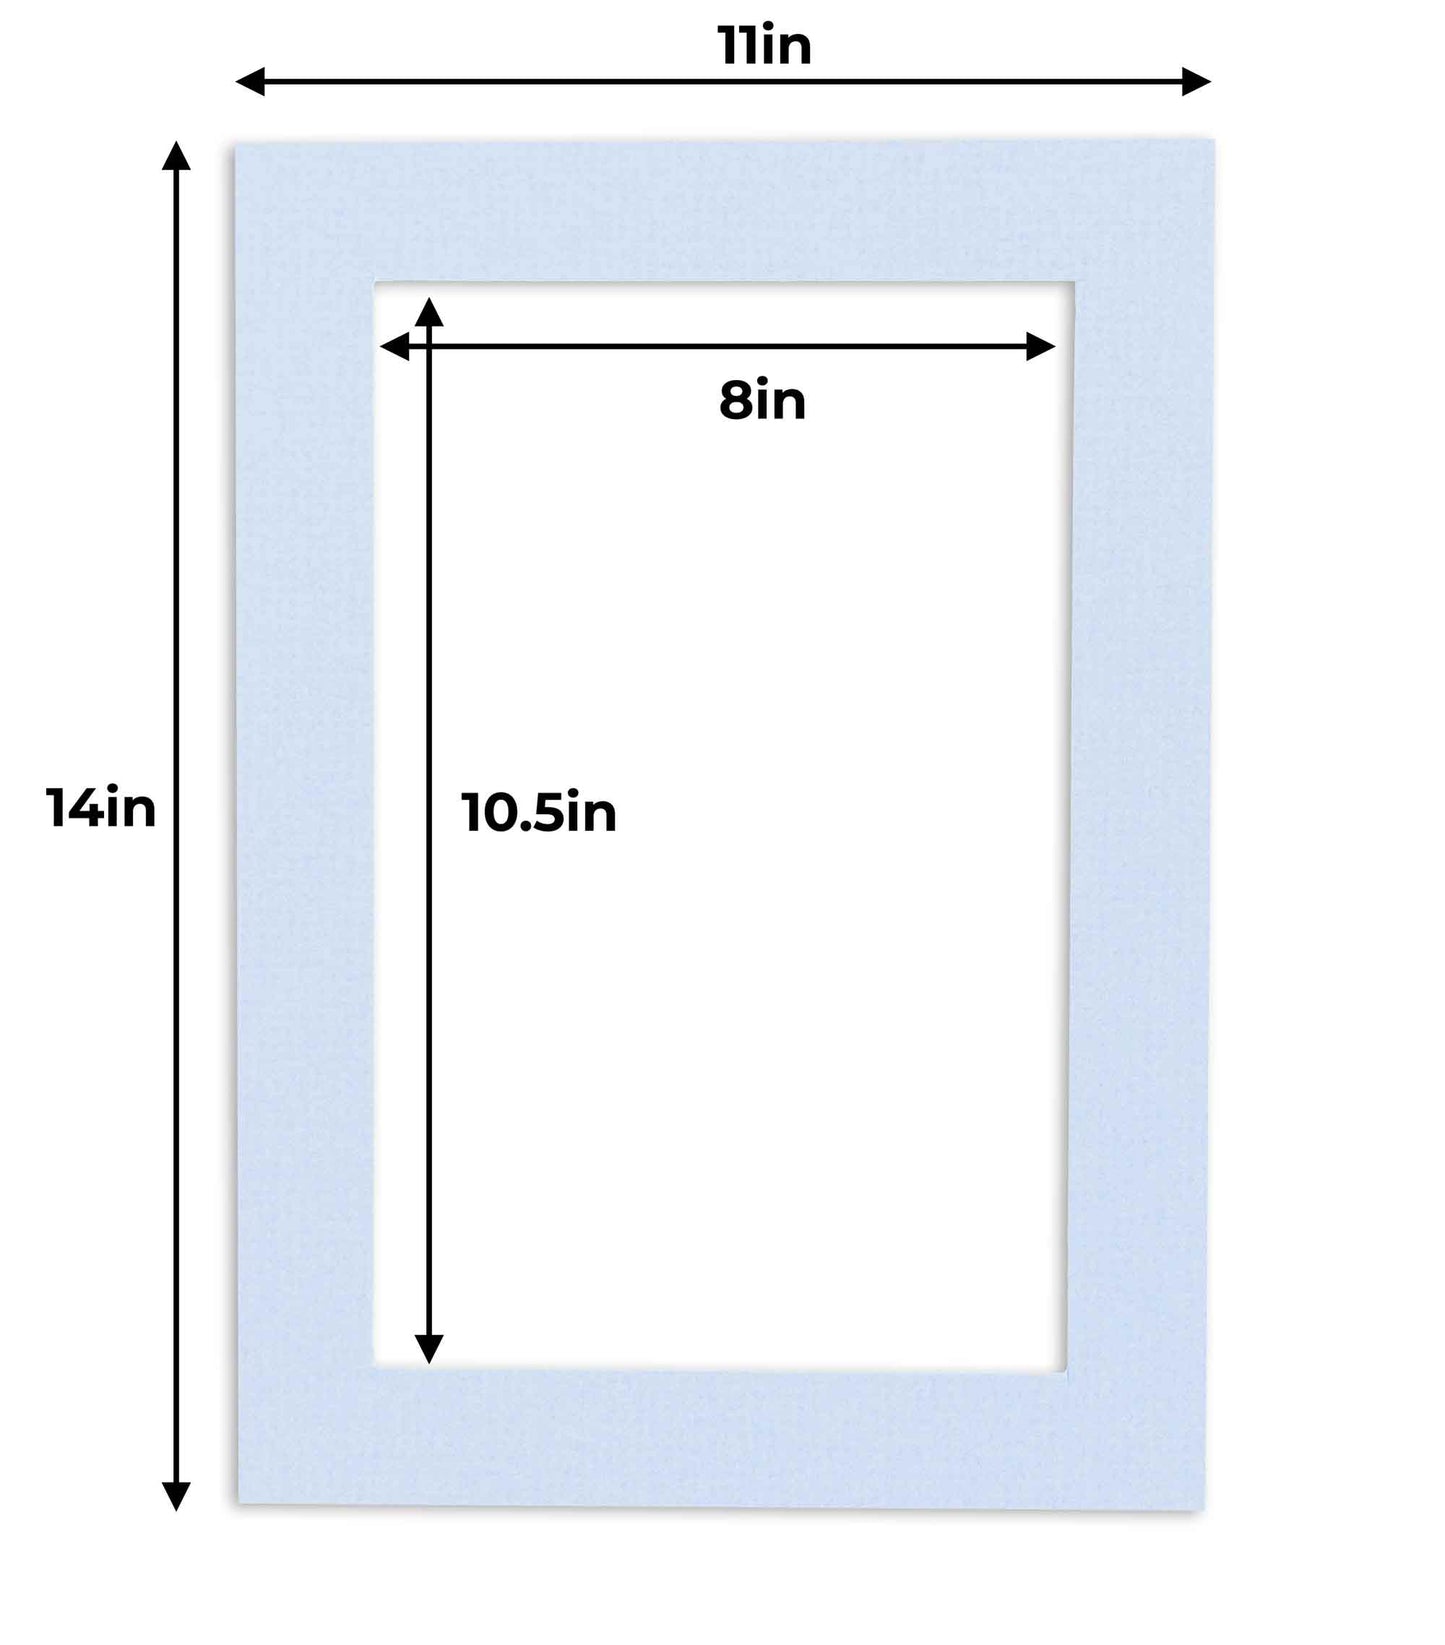 Pack of 10 Brittany Blue Precut Acid-Free Matboards